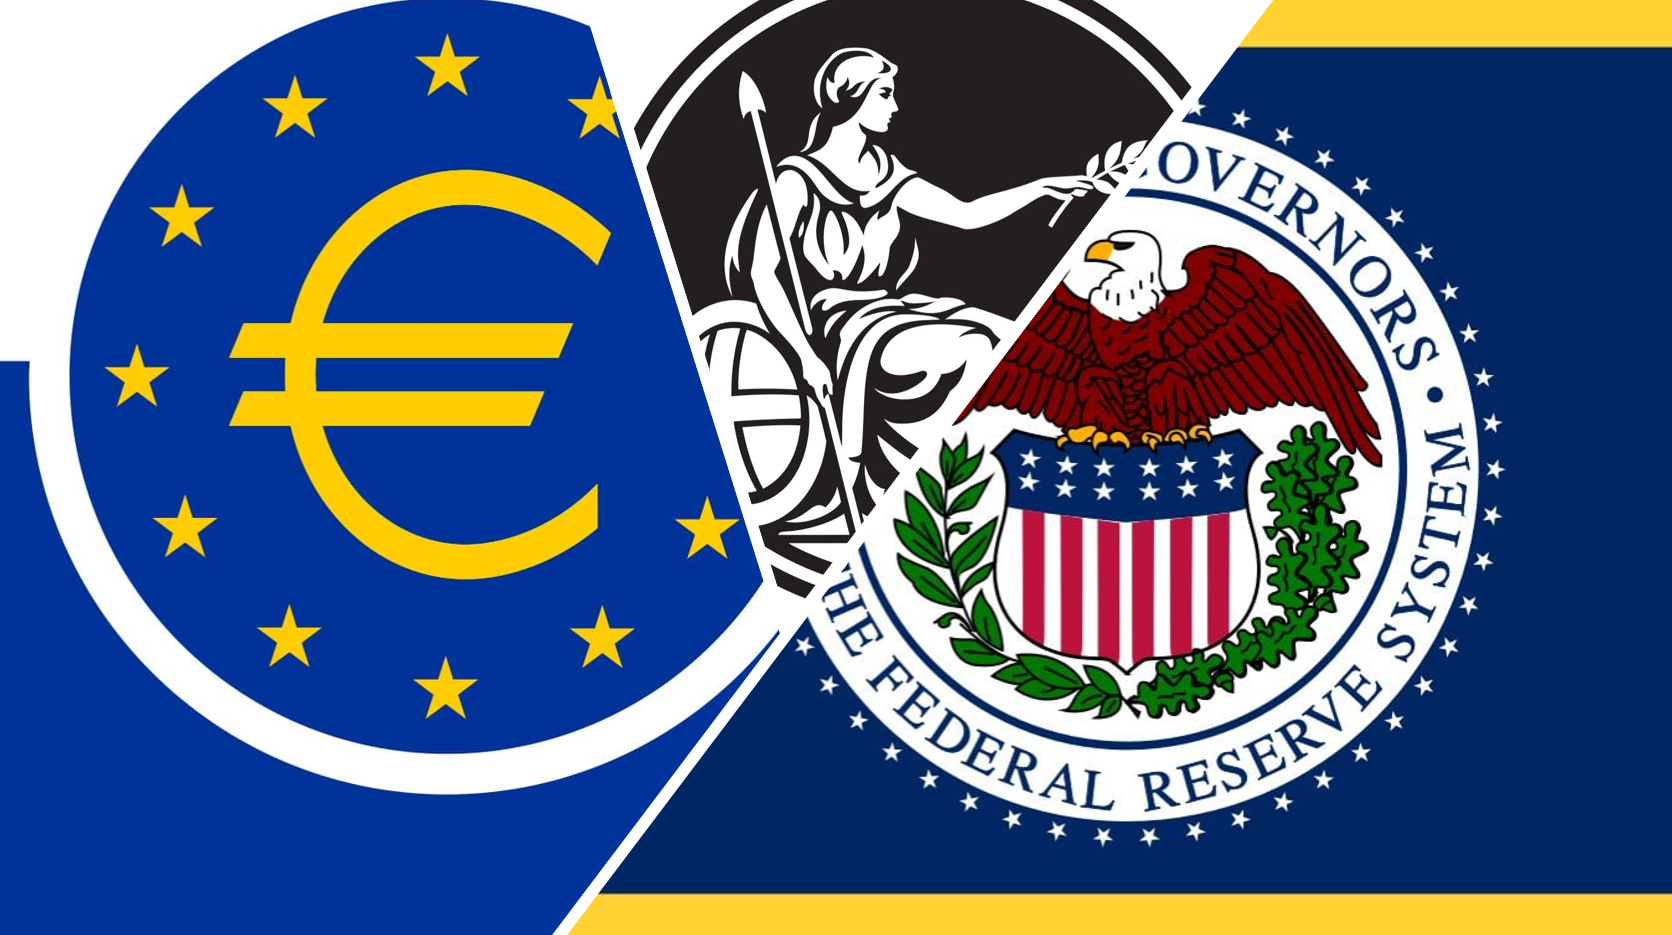 The flags or seals of three central banks.